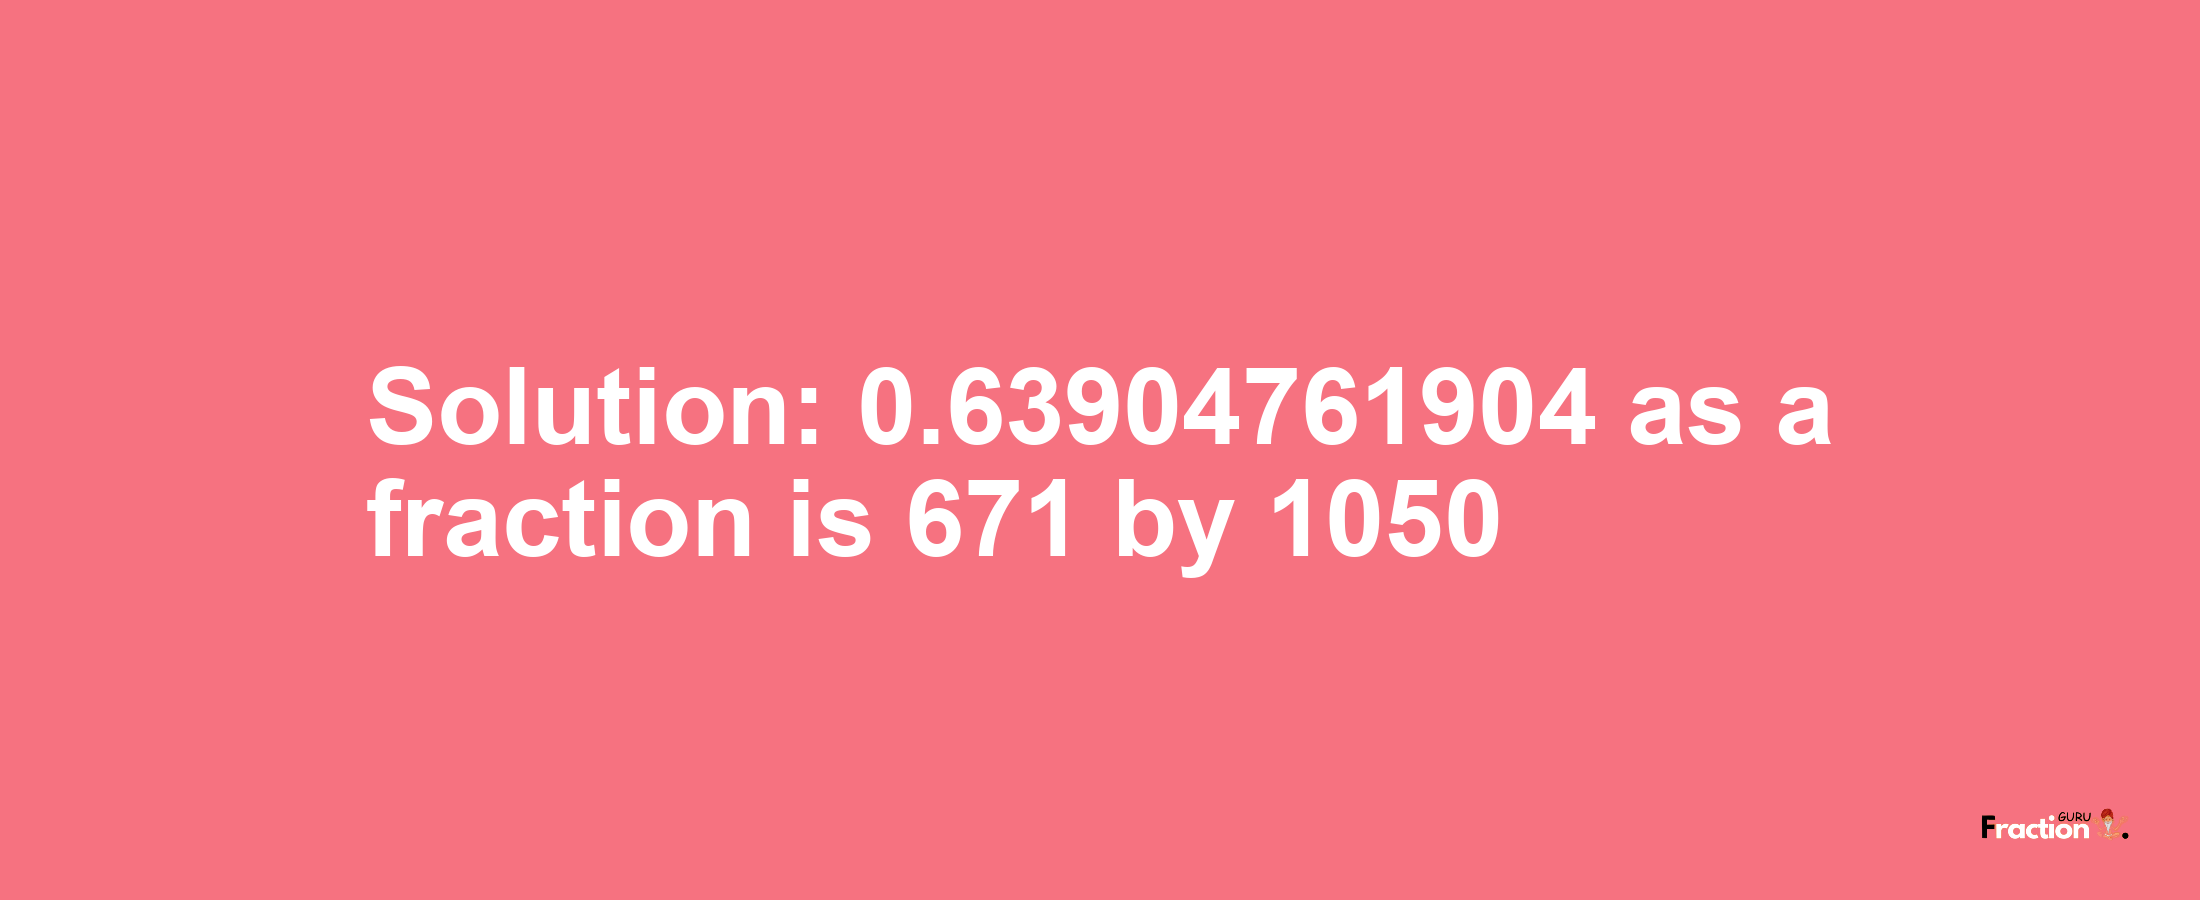 Solution:0.63904761904 as a fraction is 671/1050